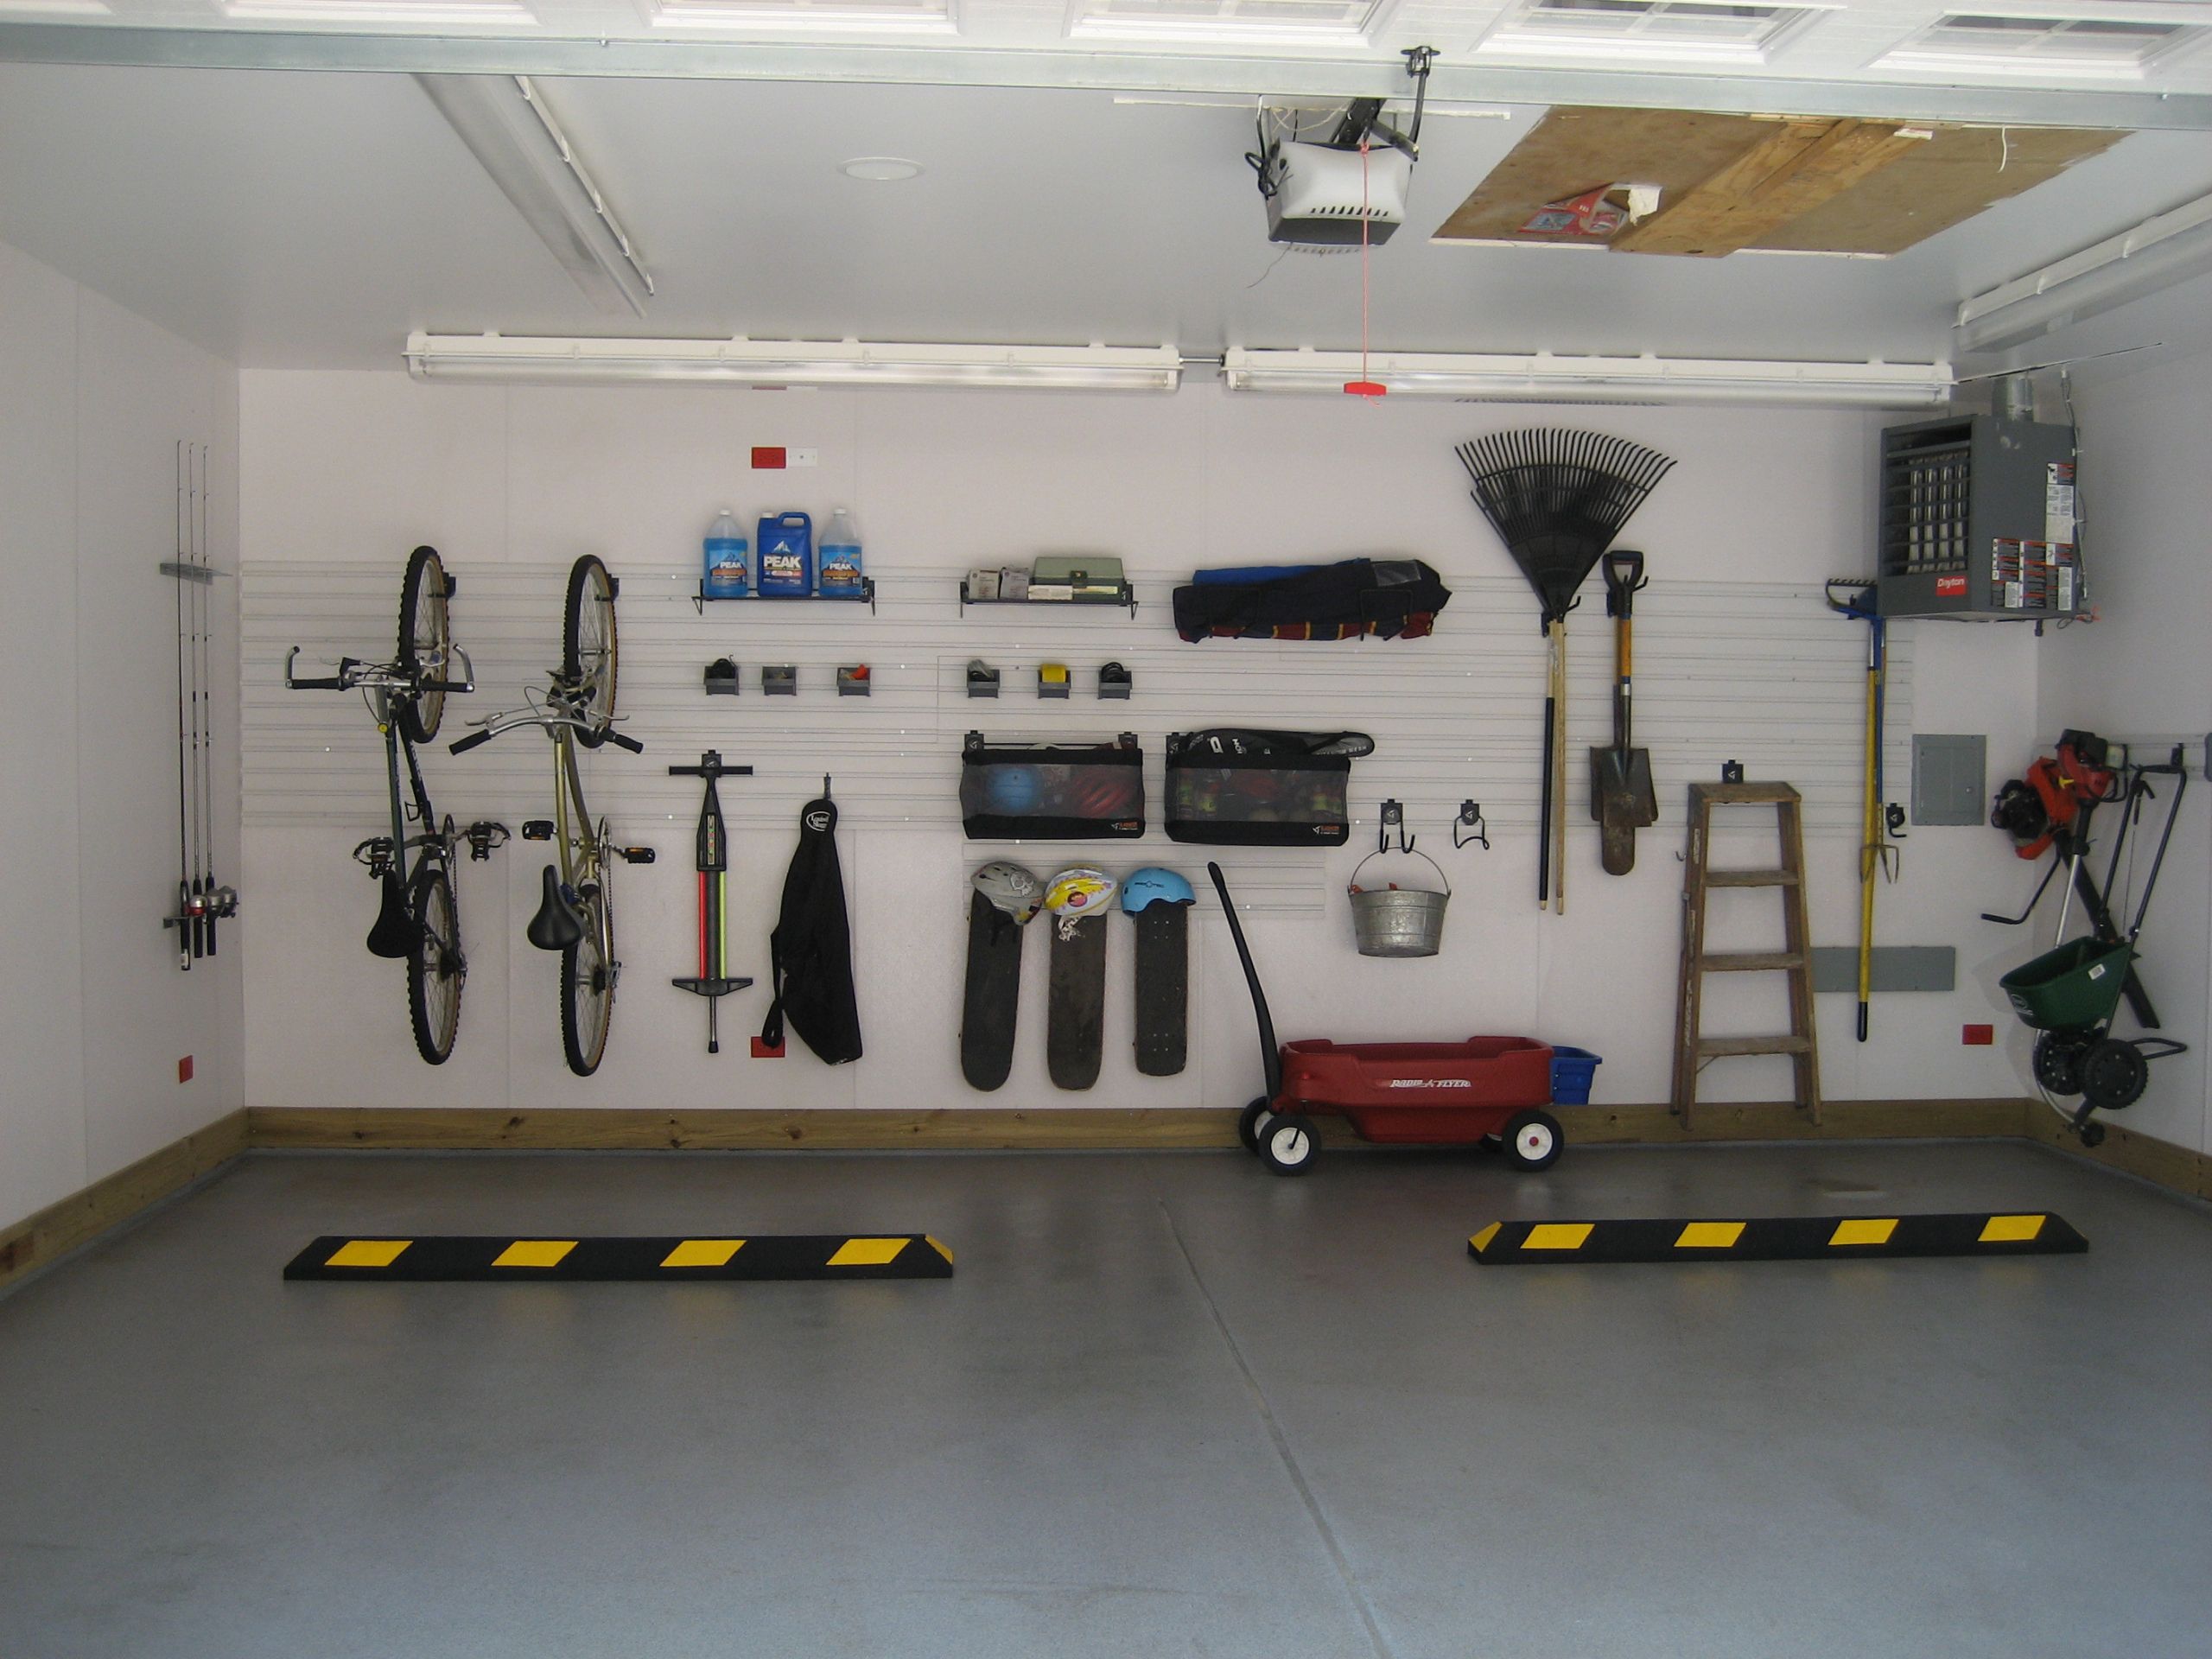 Garage Wall Organization System
 Friday Favorite Gladiator Garage Wall Systems Chaos to